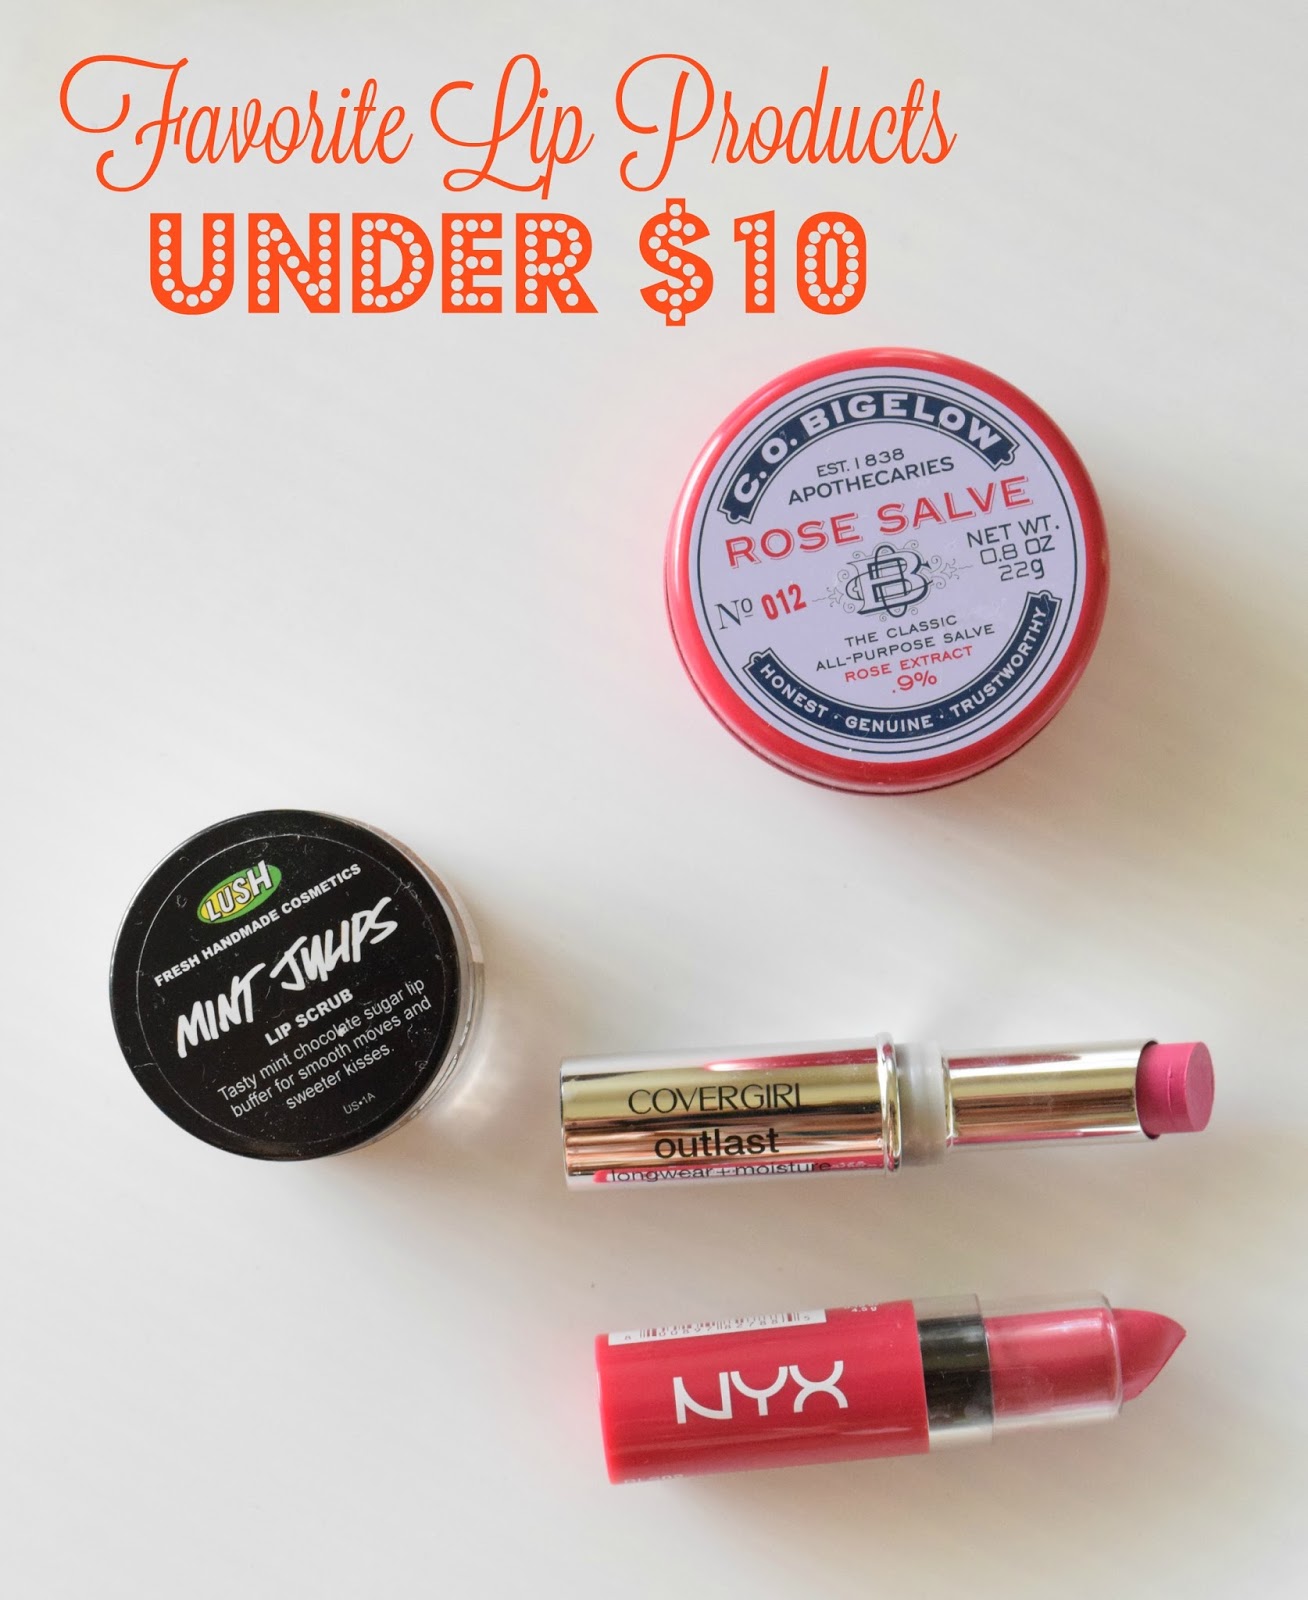 Hair & Lip Favorites Under $10 - 5 must-have items to keep in your beauty arsenal that cost less than $10 and can be picked up at Target!